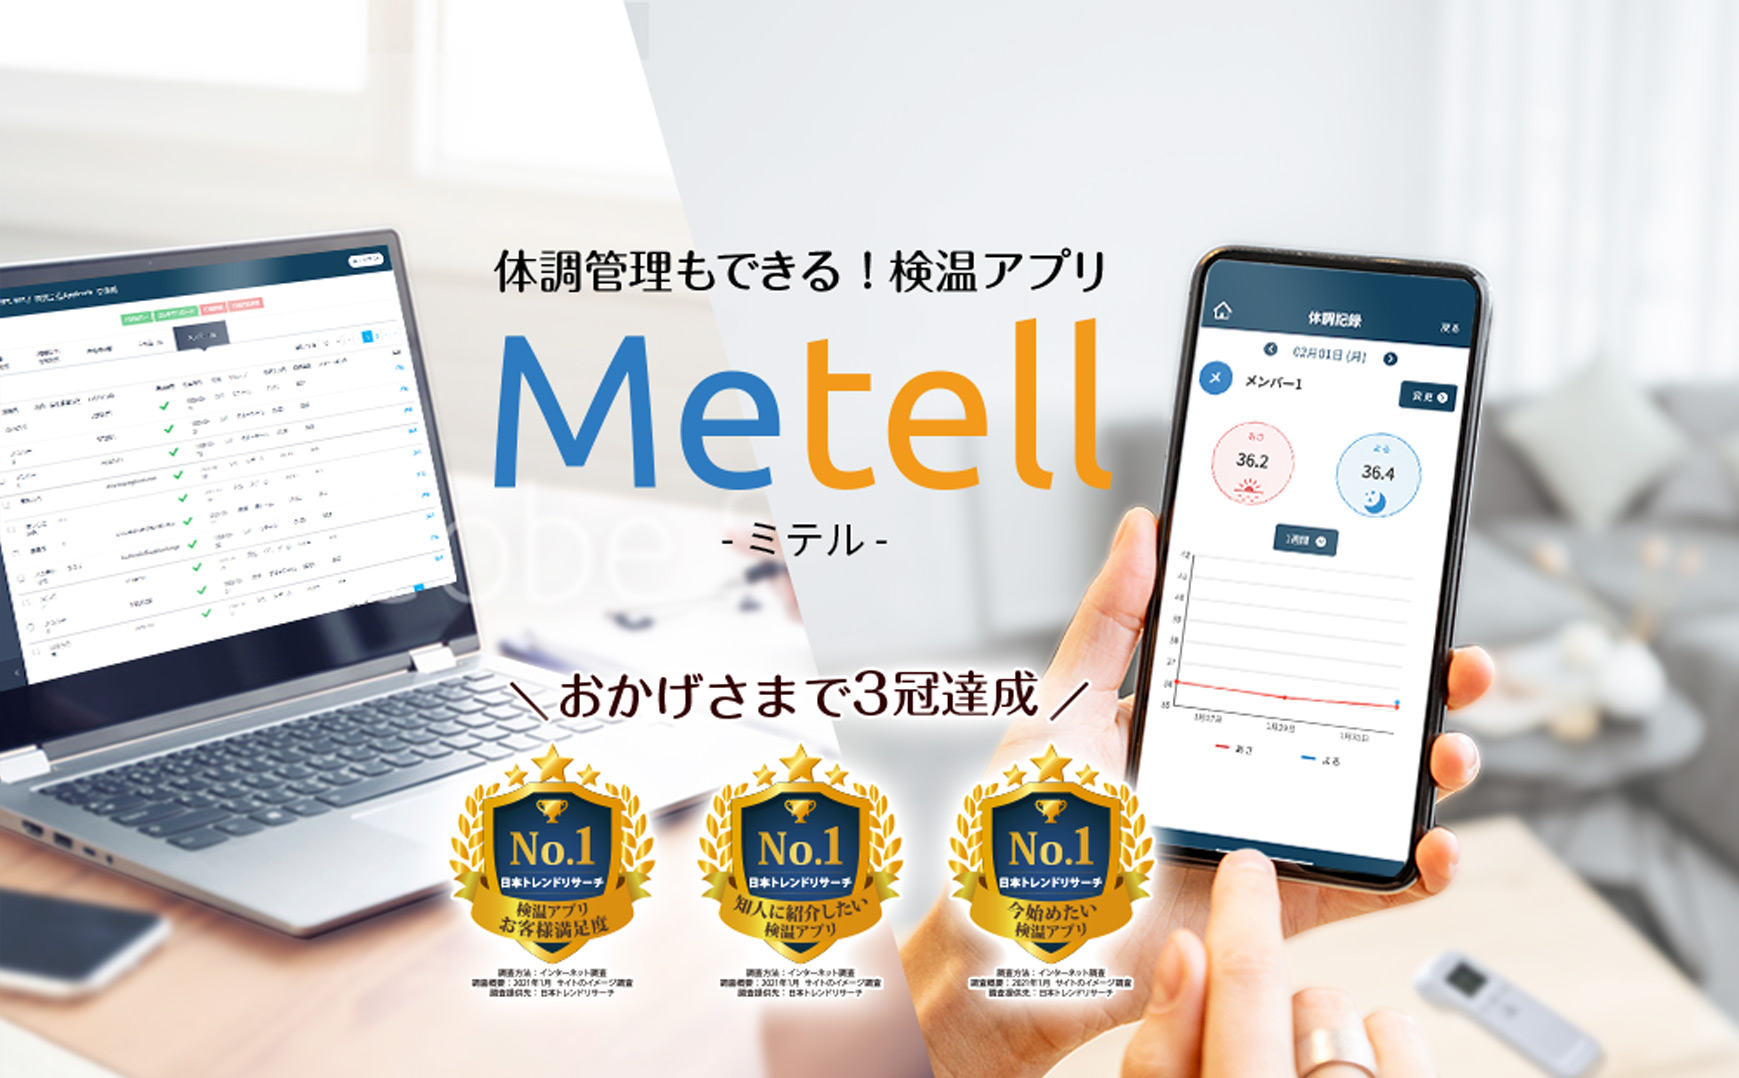 Metell® - Manage your health and take your body temperature with a single application.